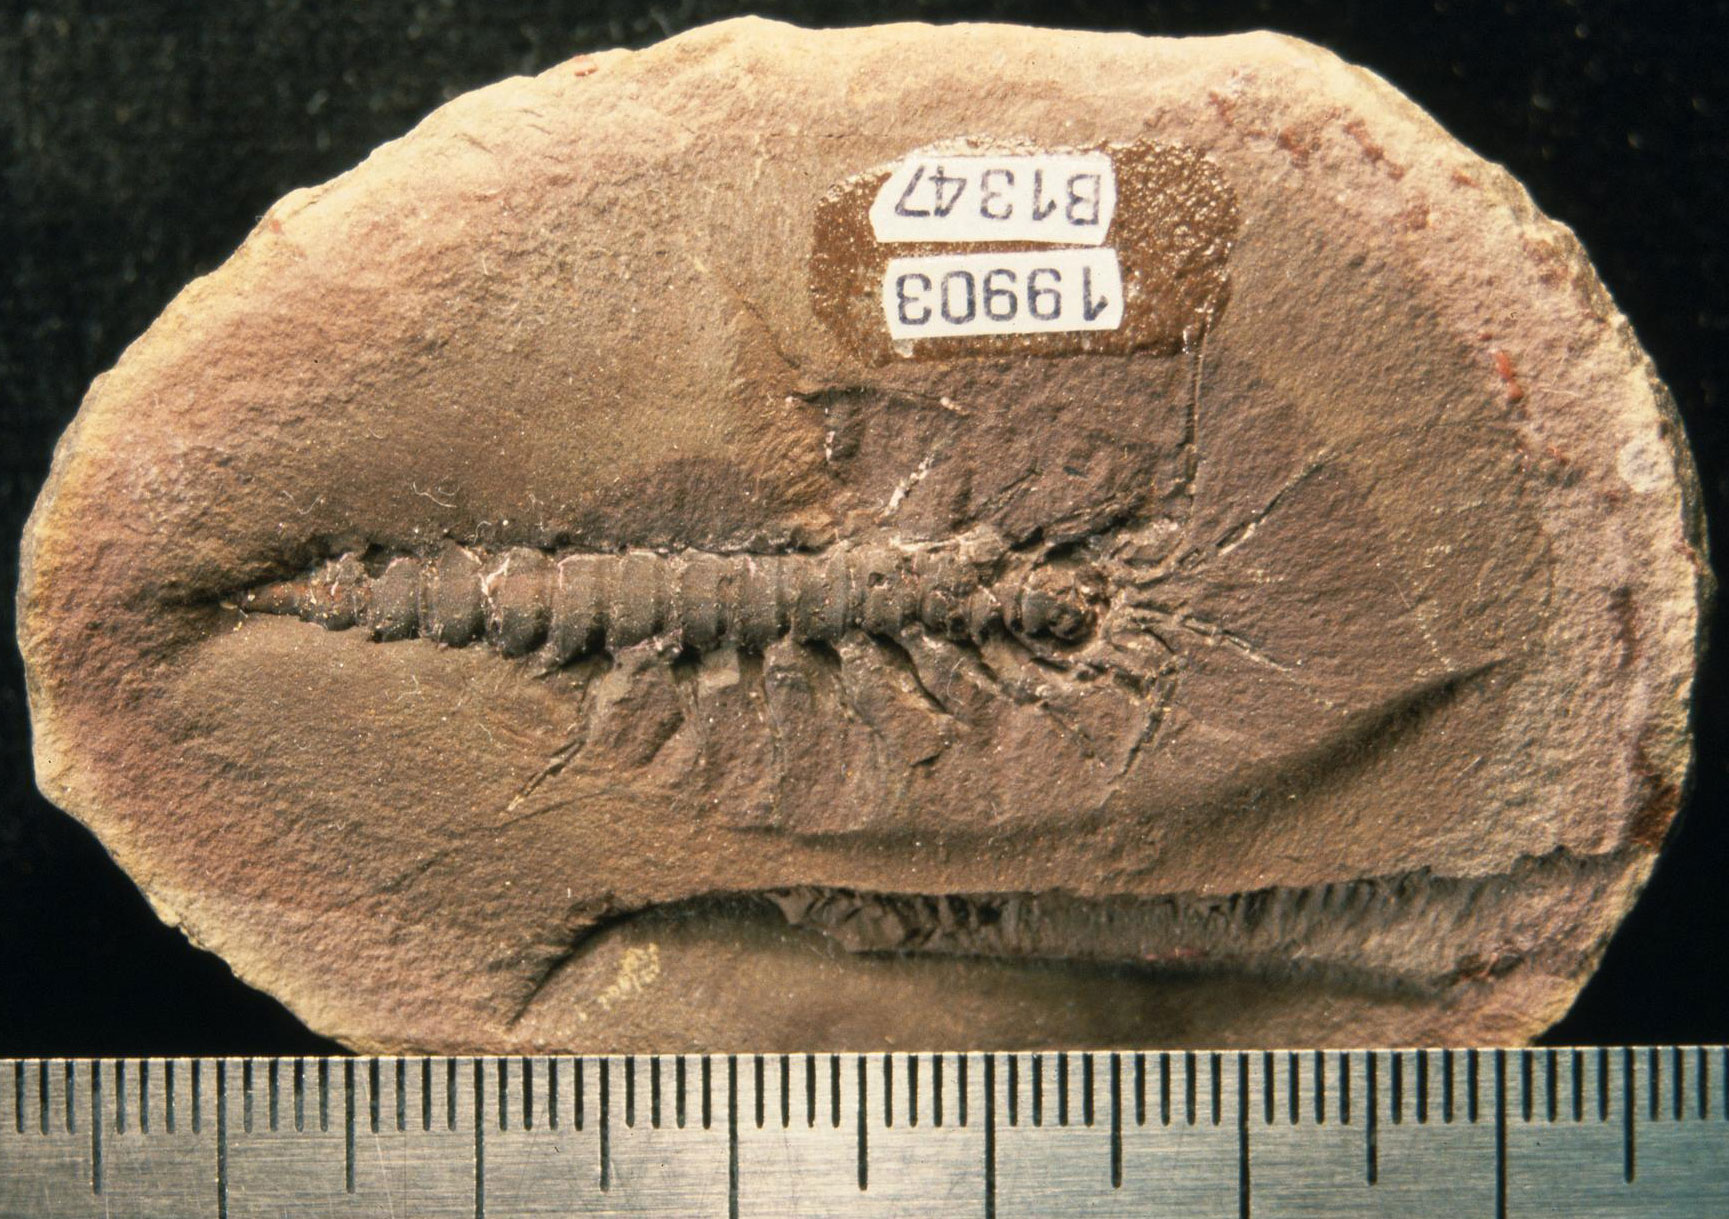 Photograph of a Mazon Creek nodule split in half to reveal the impression of a fossil crustacean on one surface. The animal has an elongated body made up of multiple segments. It has multiple long legs and antennae emerging from its head. The overall length of the animal is more than 4 centimeters.